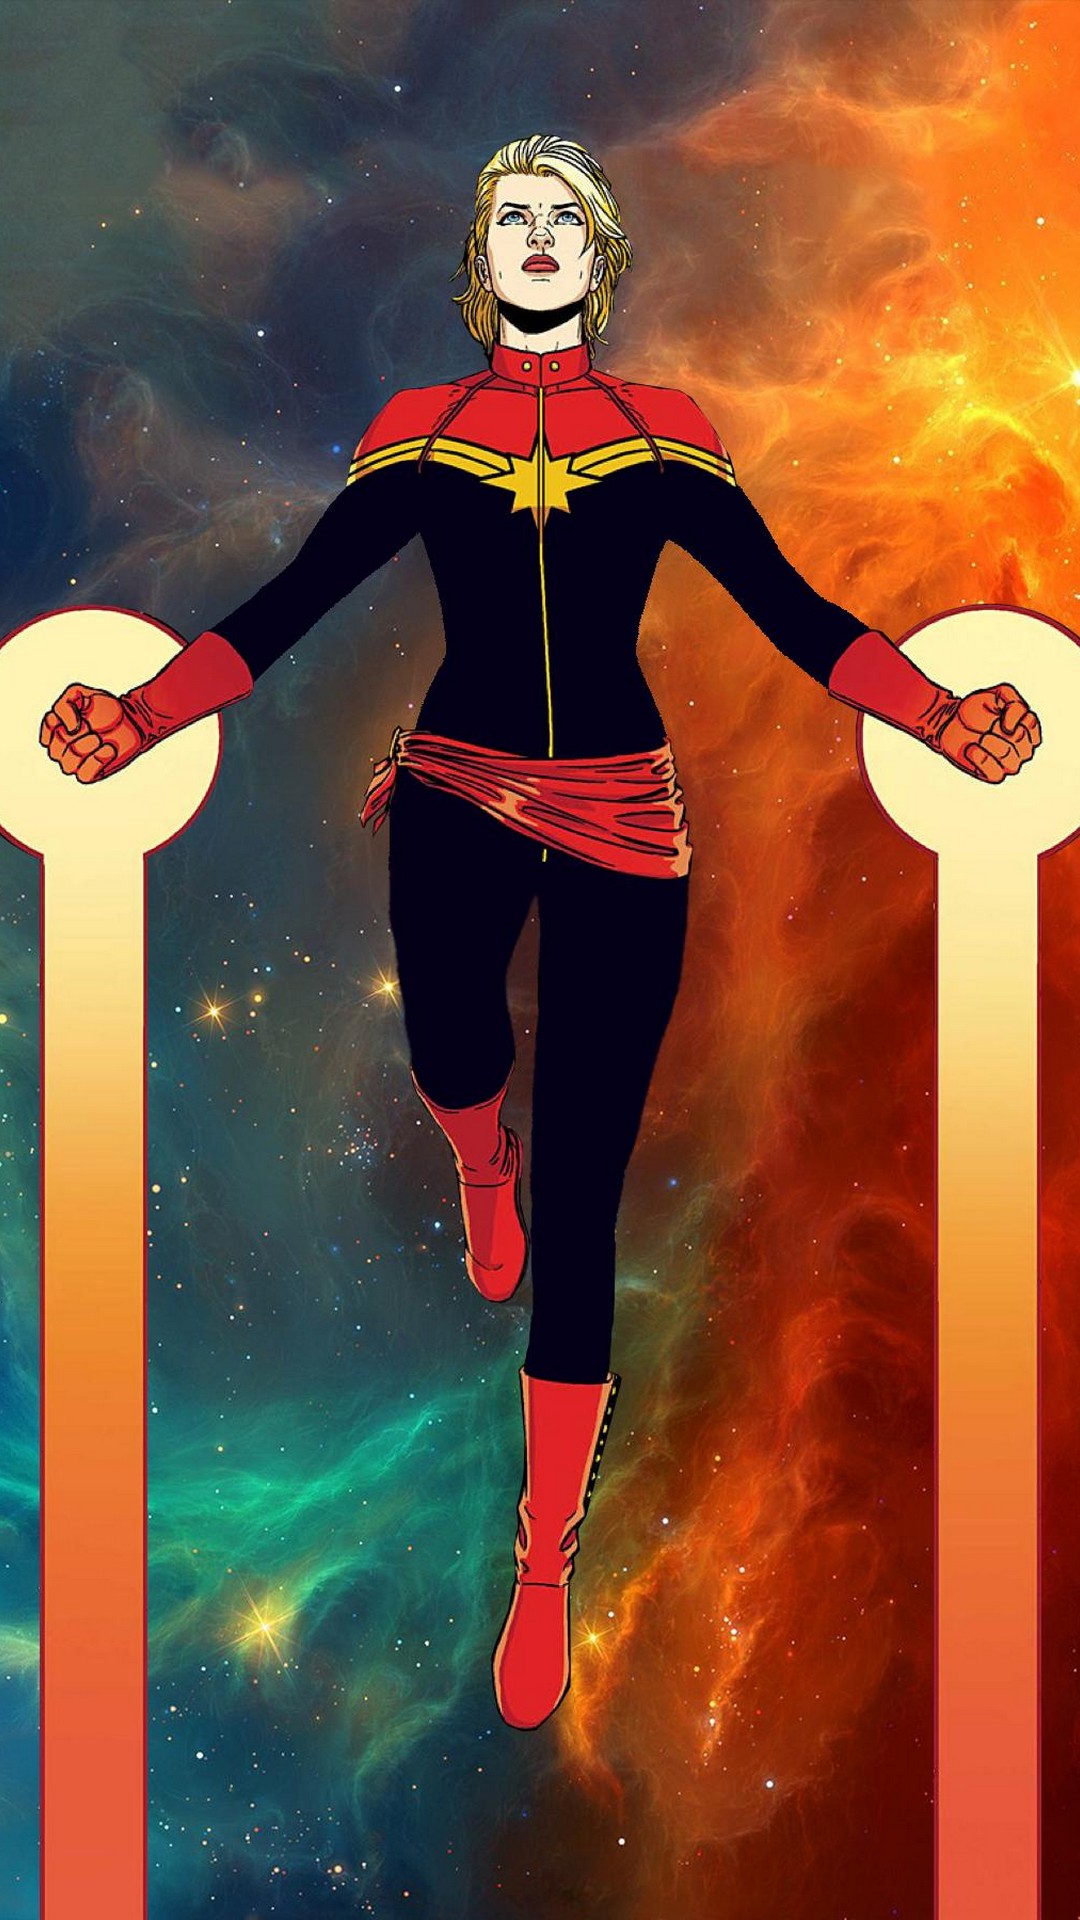 Captain Marvel Animated Android Wallpaper with high-resolution 1080x1920 pixel. You can use this wallpaper for your Android backgrounds, Tablet, Samsung Screensavers, Mobile Phone Lock Screen and another Smartphones device